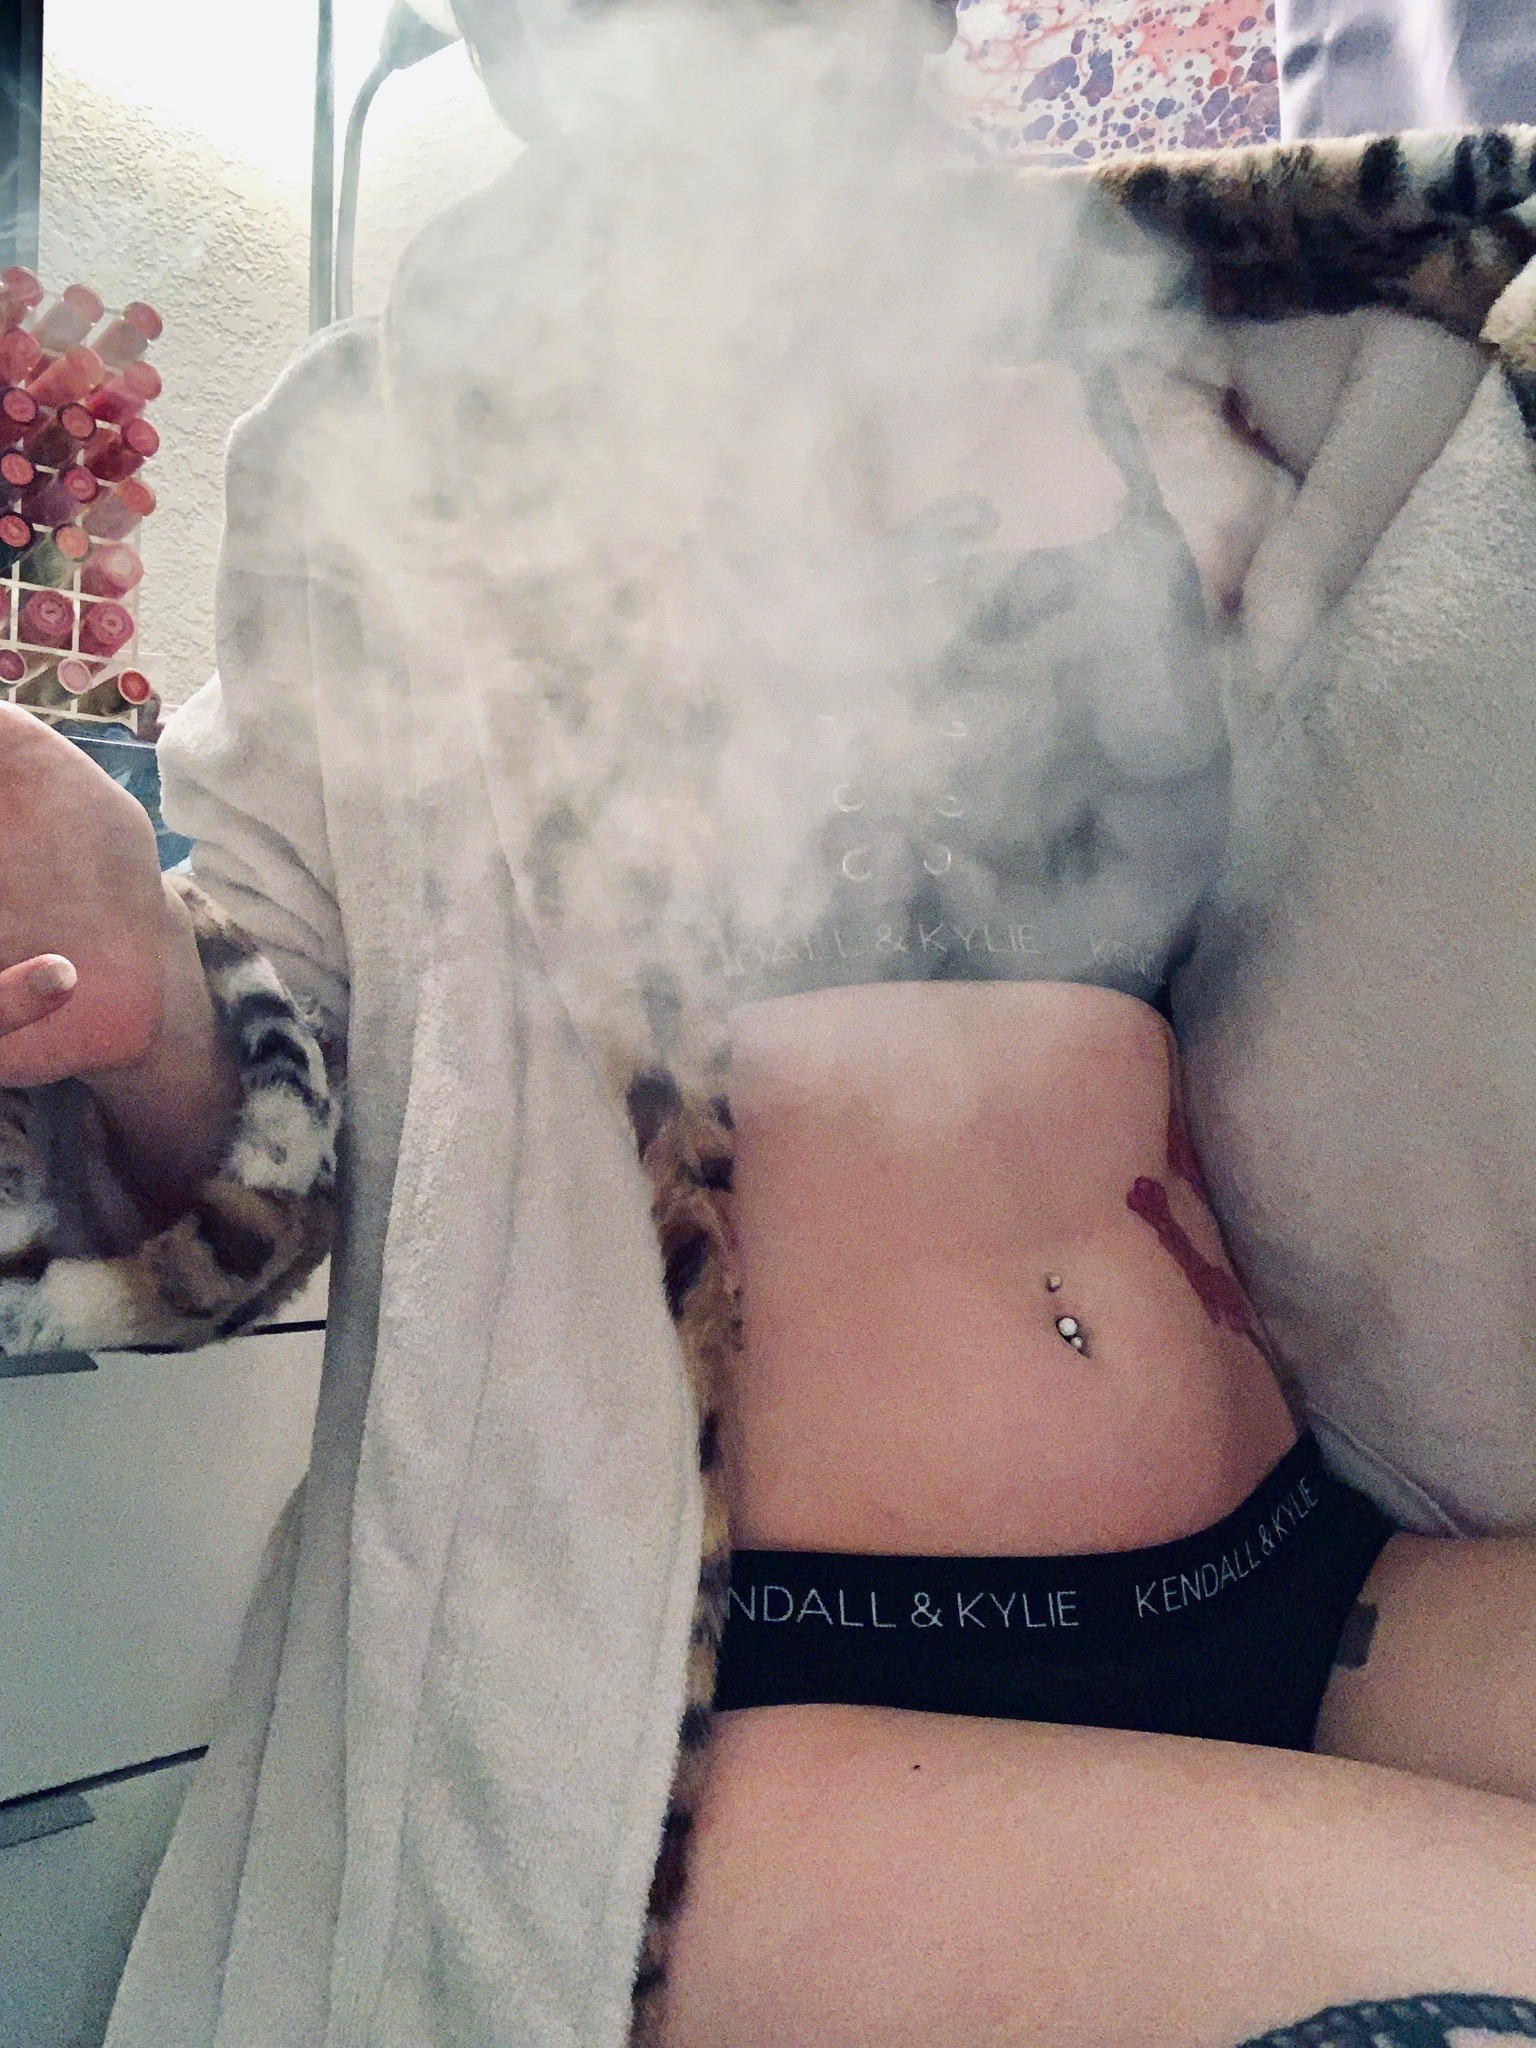 XXX bakedloaf:More joints in my bathrobe please photo